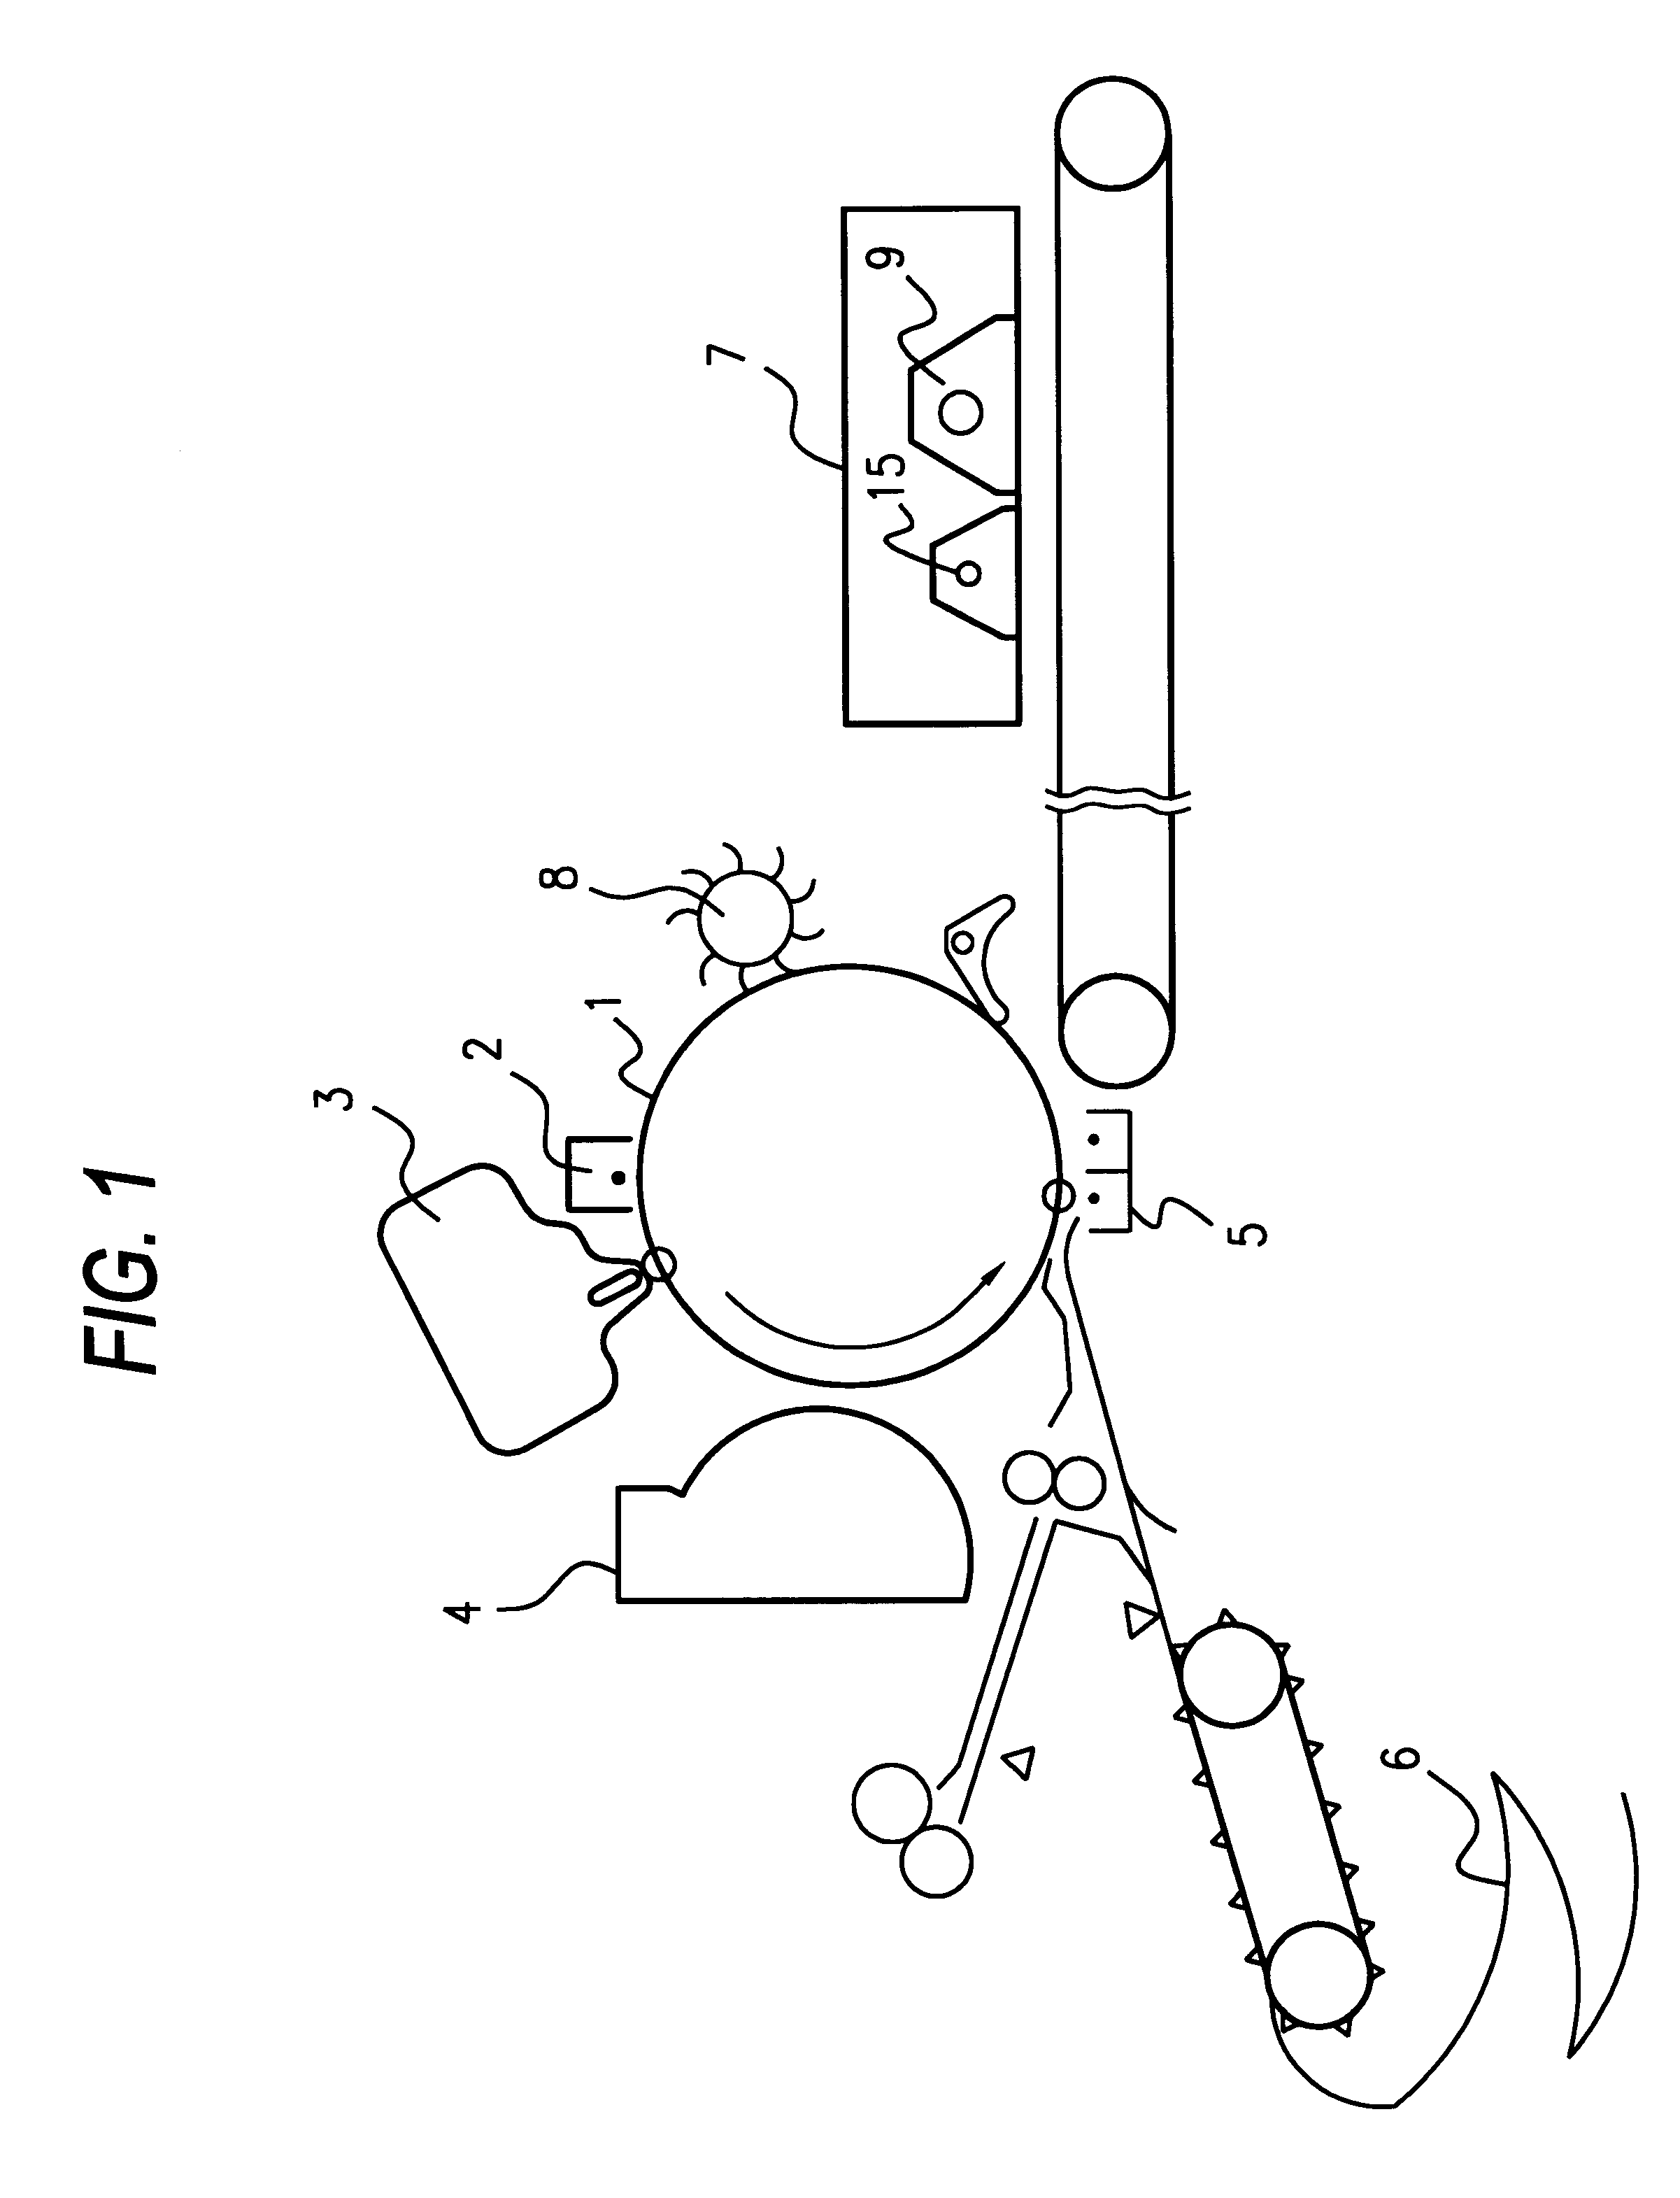 Toner composition for developing electrostatic latent image